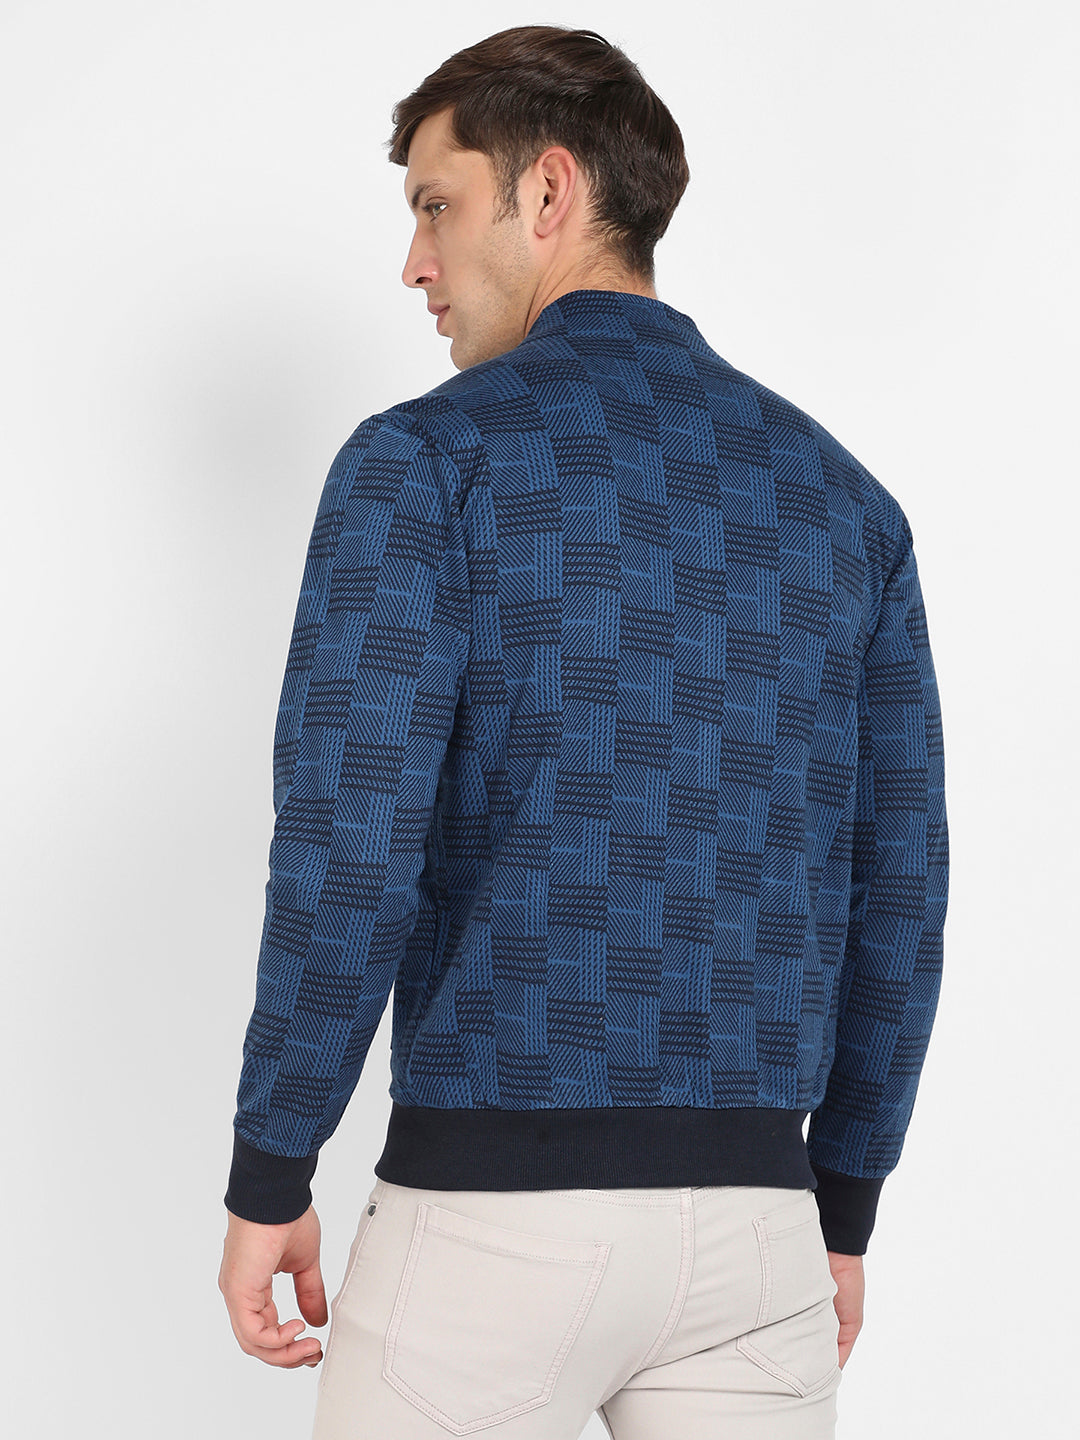 Textured Jacket With Flap Pocket